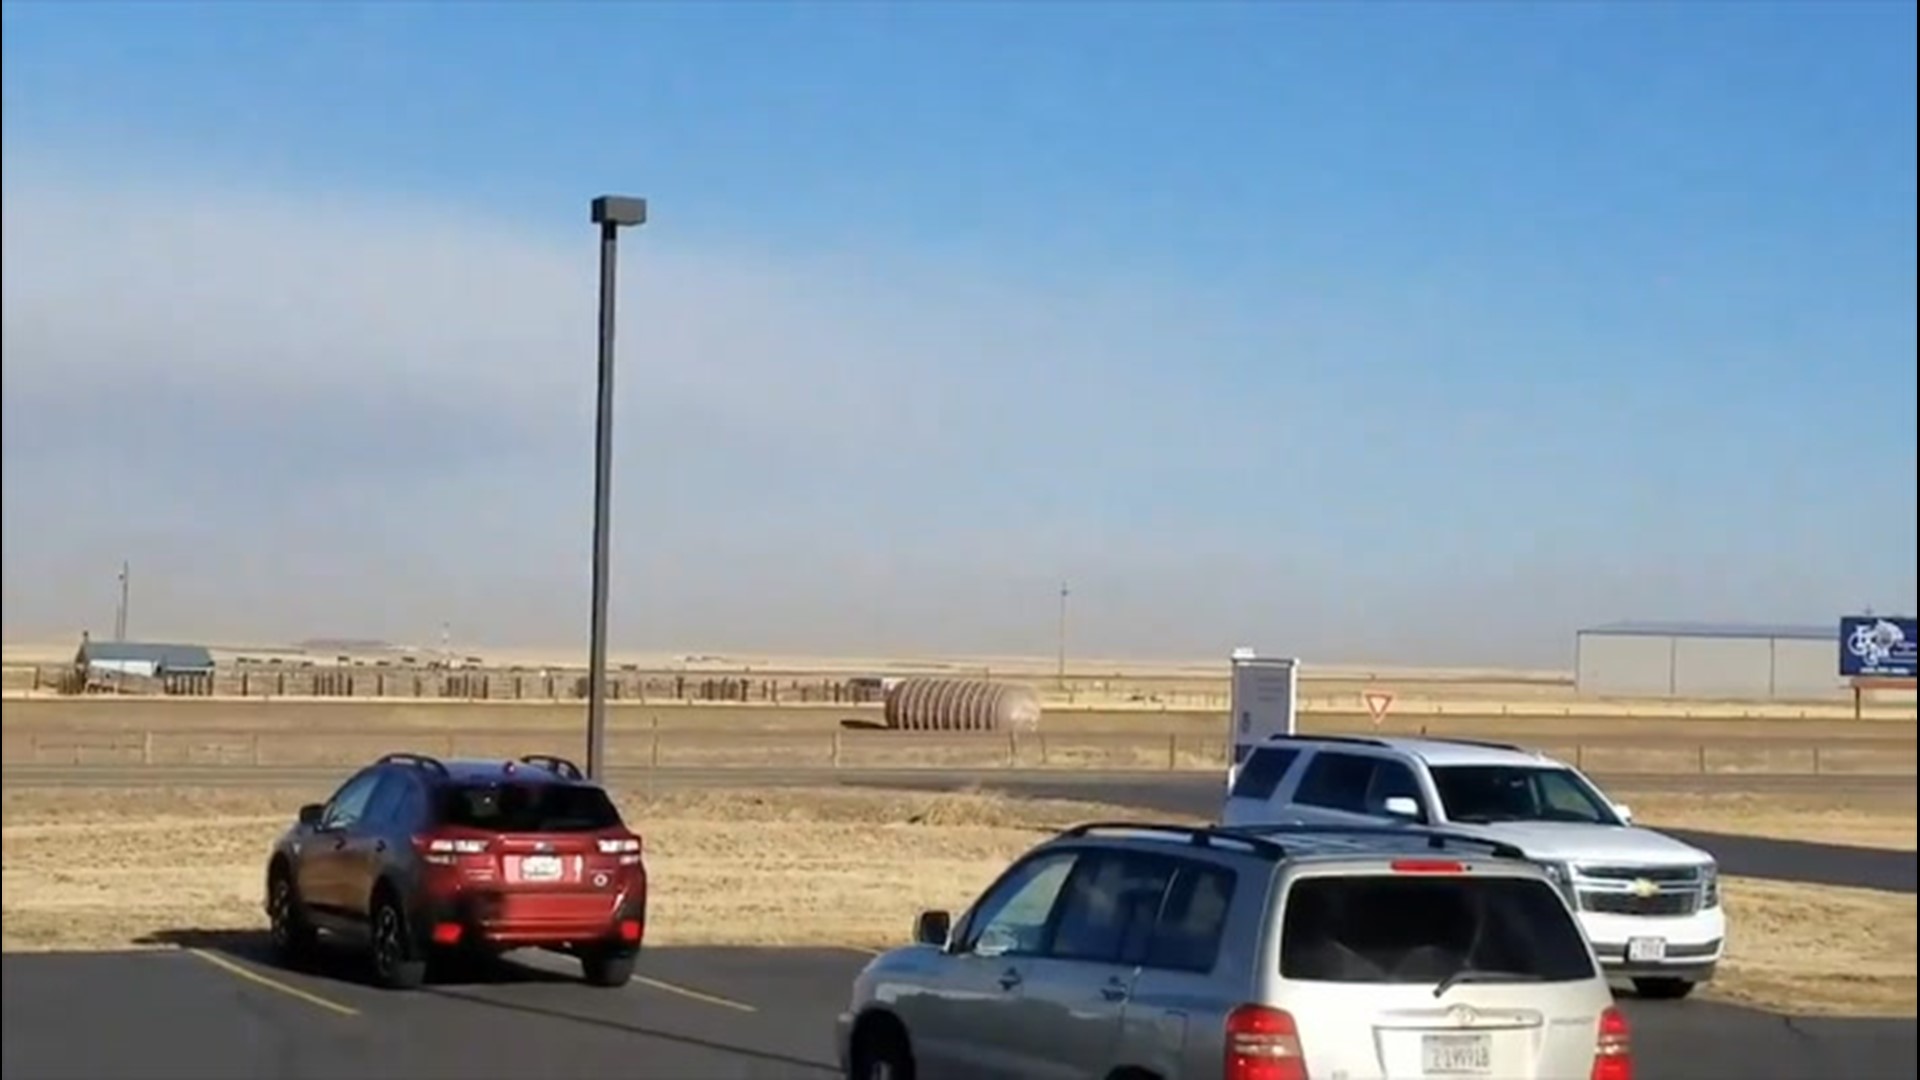 High winds blew large containers into a highway sign and across an active highway in Great Falls, Montana, on Jan. 13.